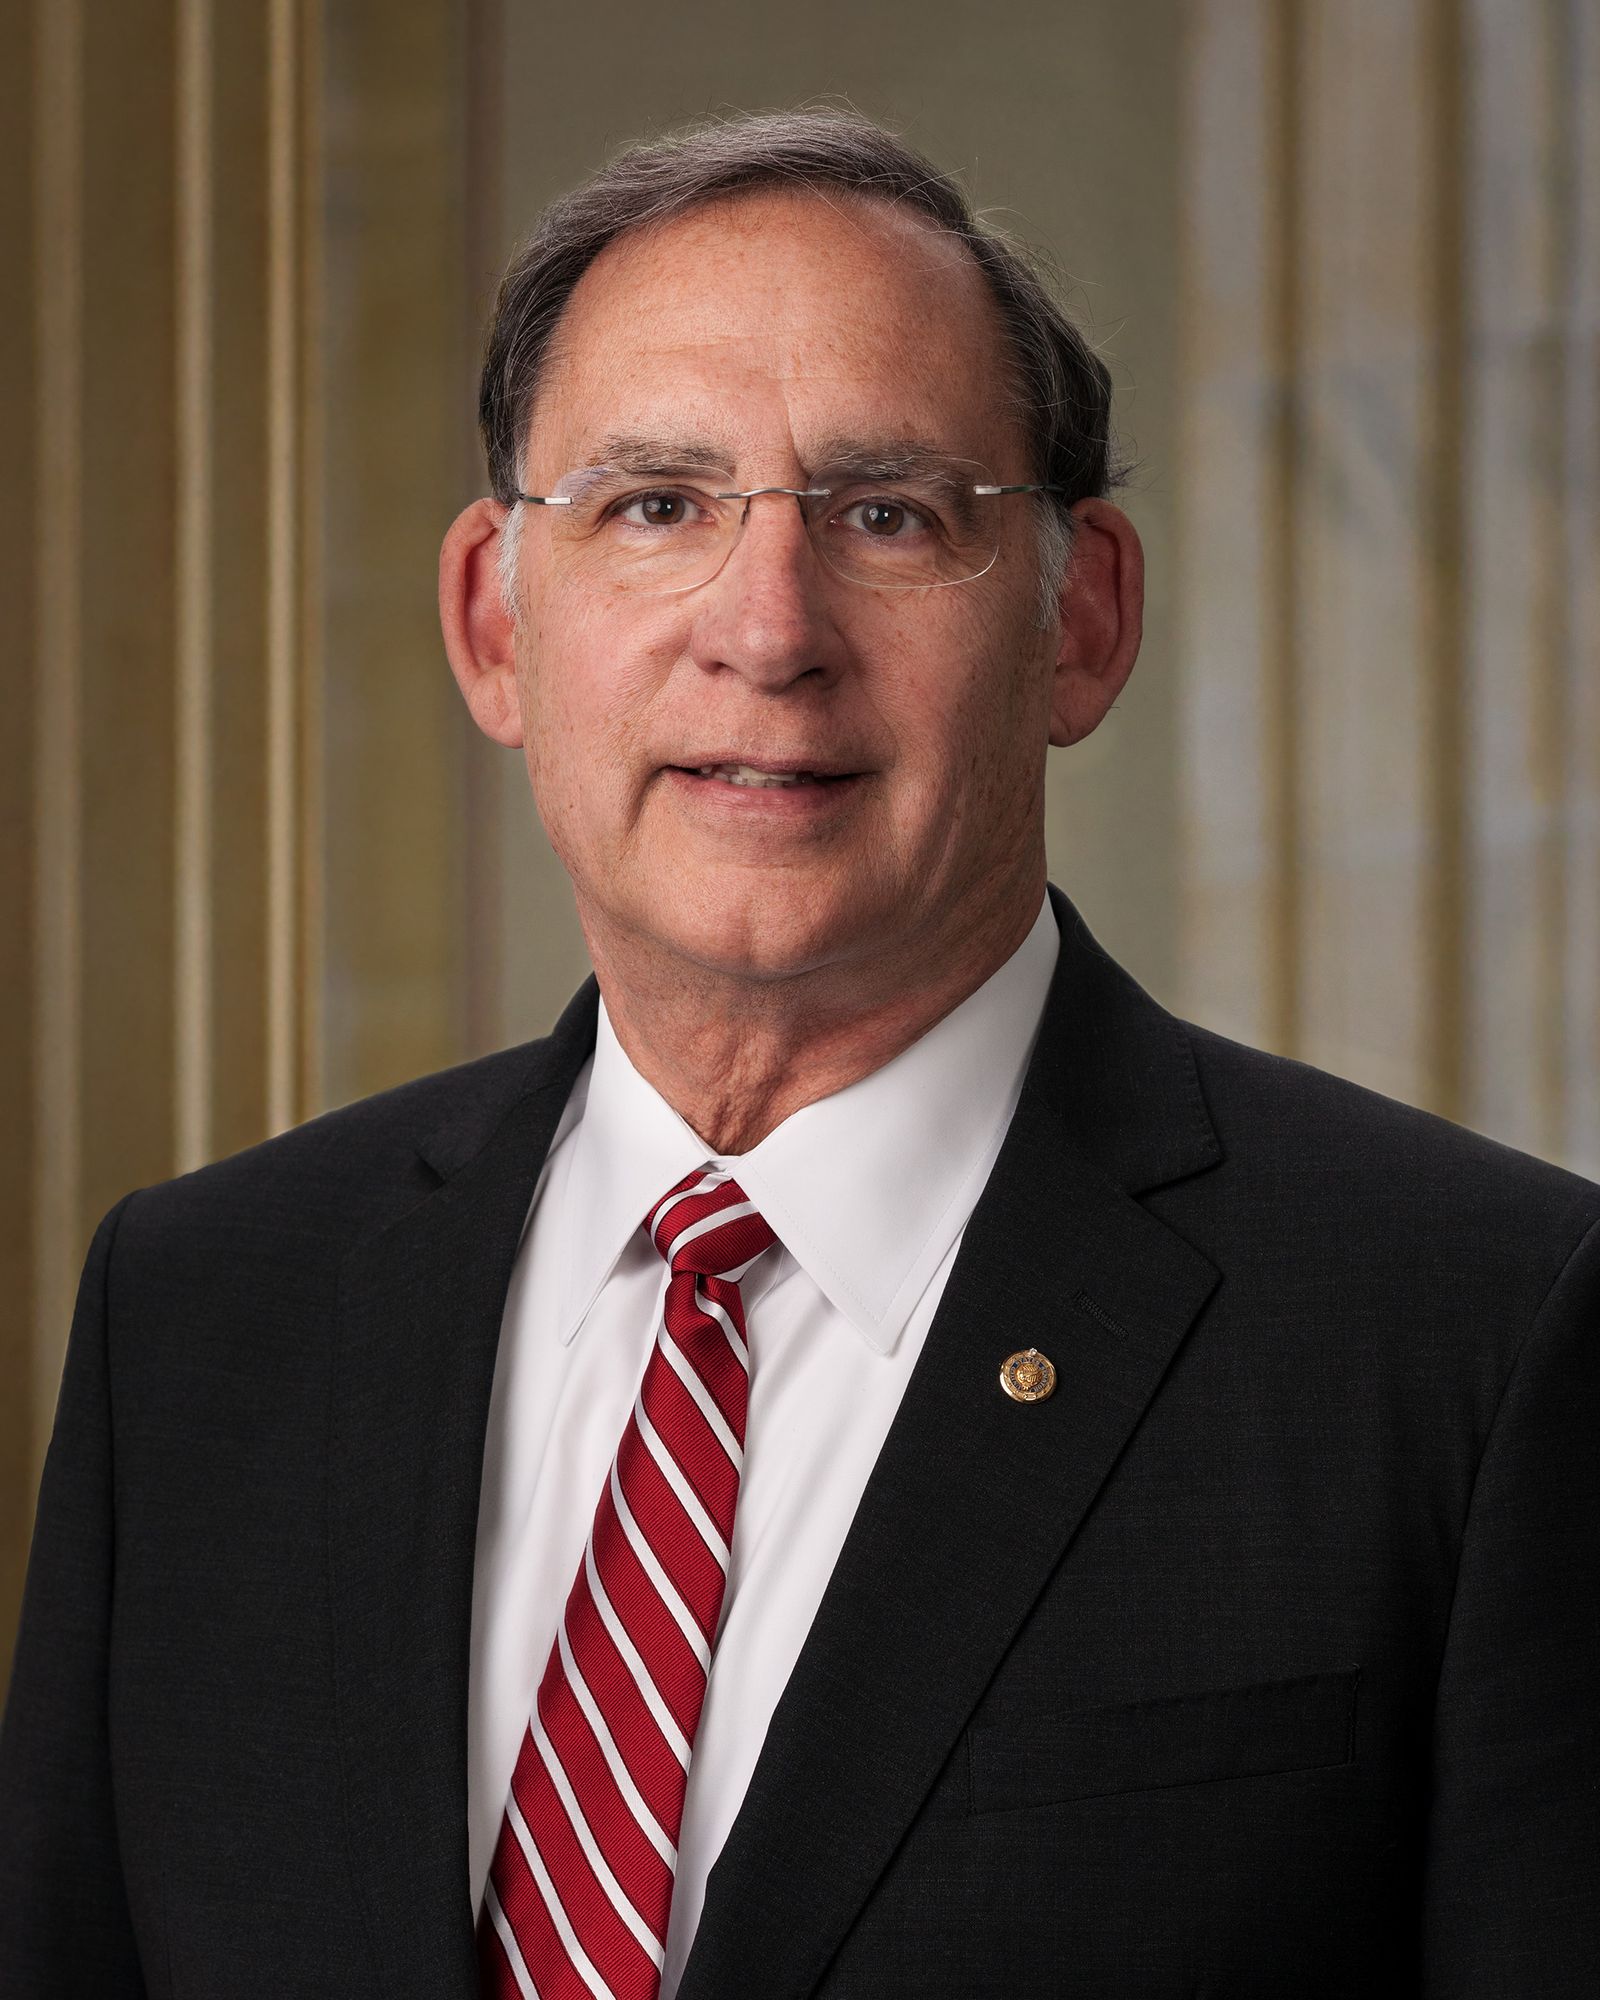 This is a headshot of Sen. John Boozman, R-Ark., ranking member of the Senate Agriculture, Nutrition and Forestry Committee.